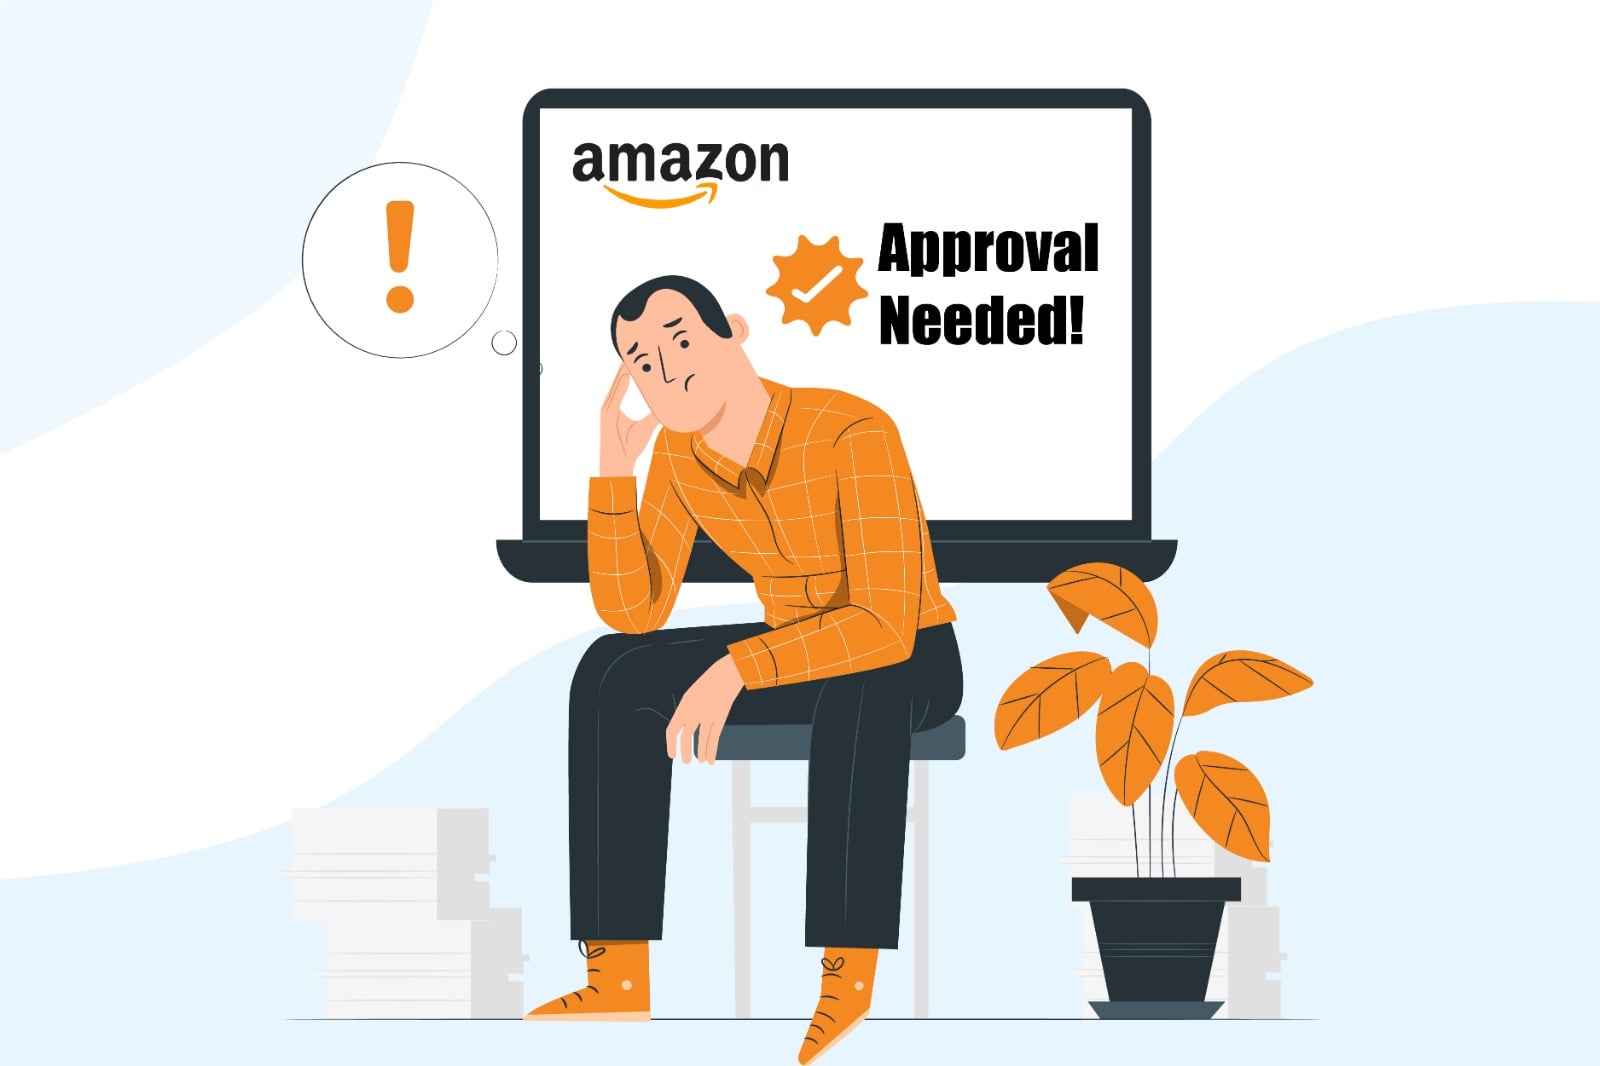 What does Amazon approval needed mean